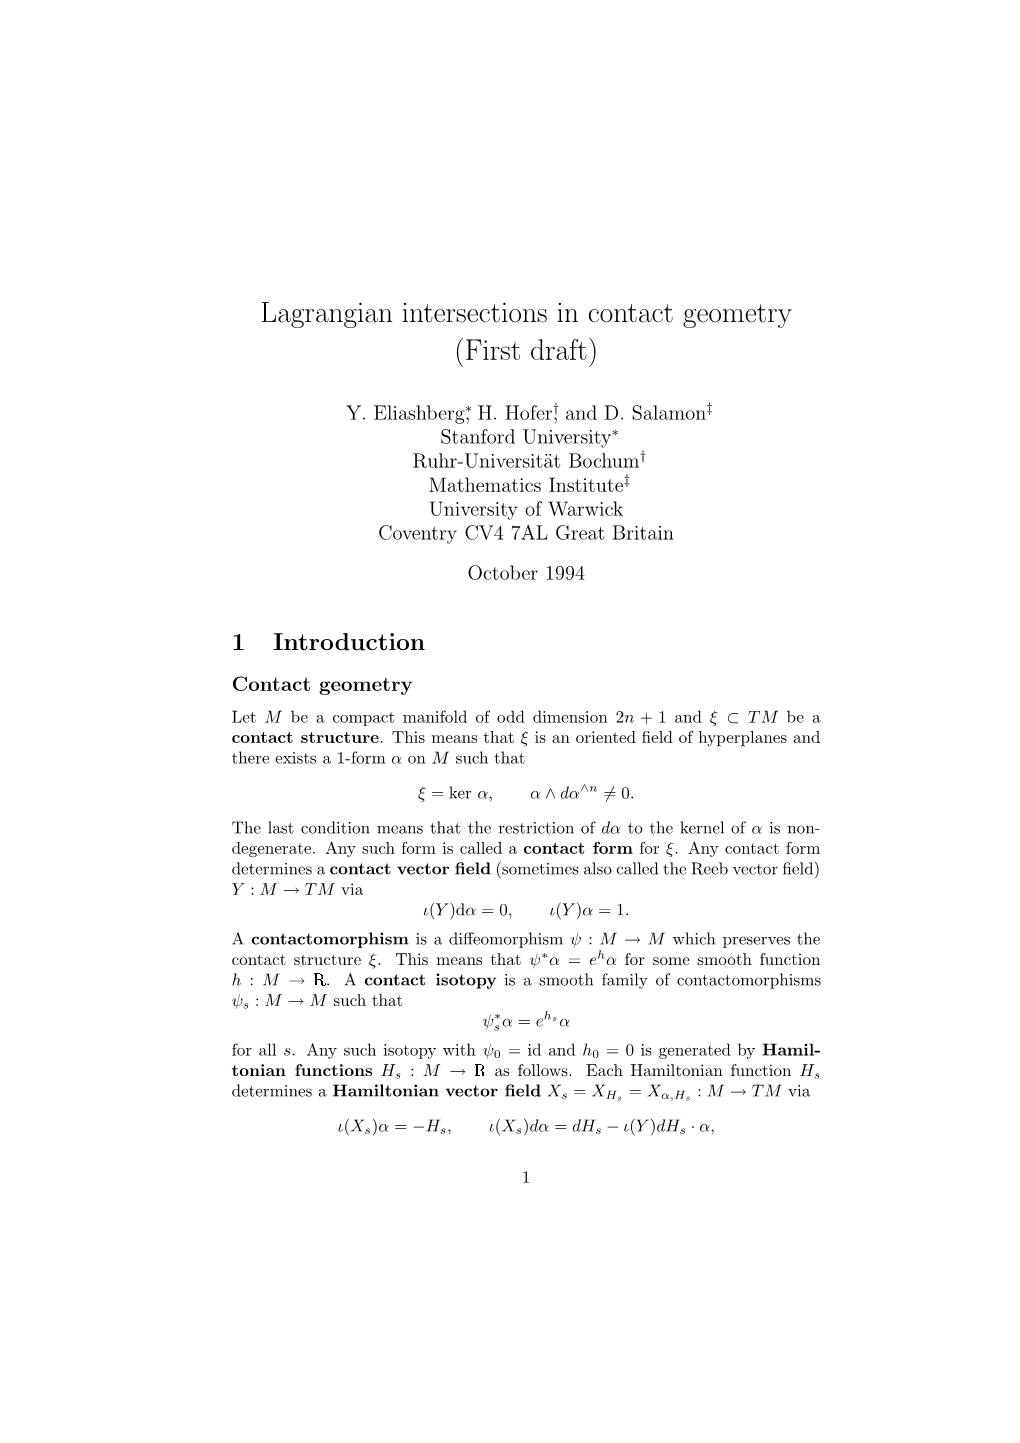 Lagrangian Intersections in Contact Geometry (First Draft)